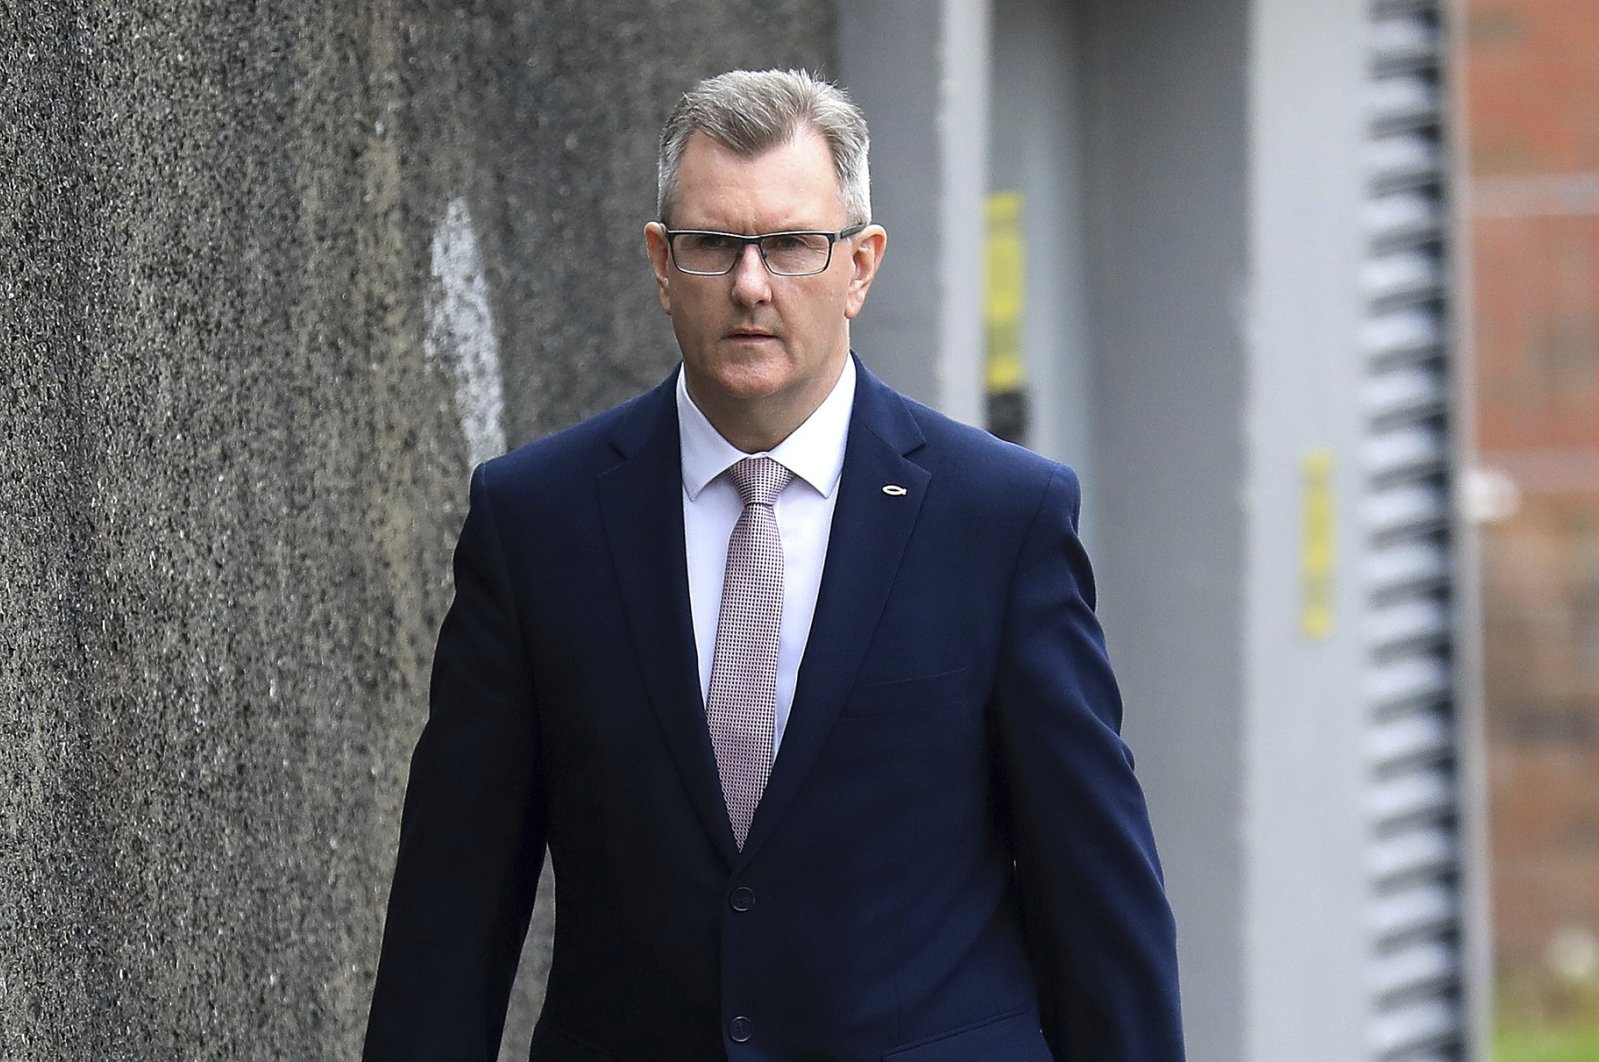 Democratic Unionist Party leader Jeffrey Donaldson leaves the party headquarters in east Belfast after voting took place to elect a new leader, Northern Ireland, U.K., May 14, 2021. (AP Photo)